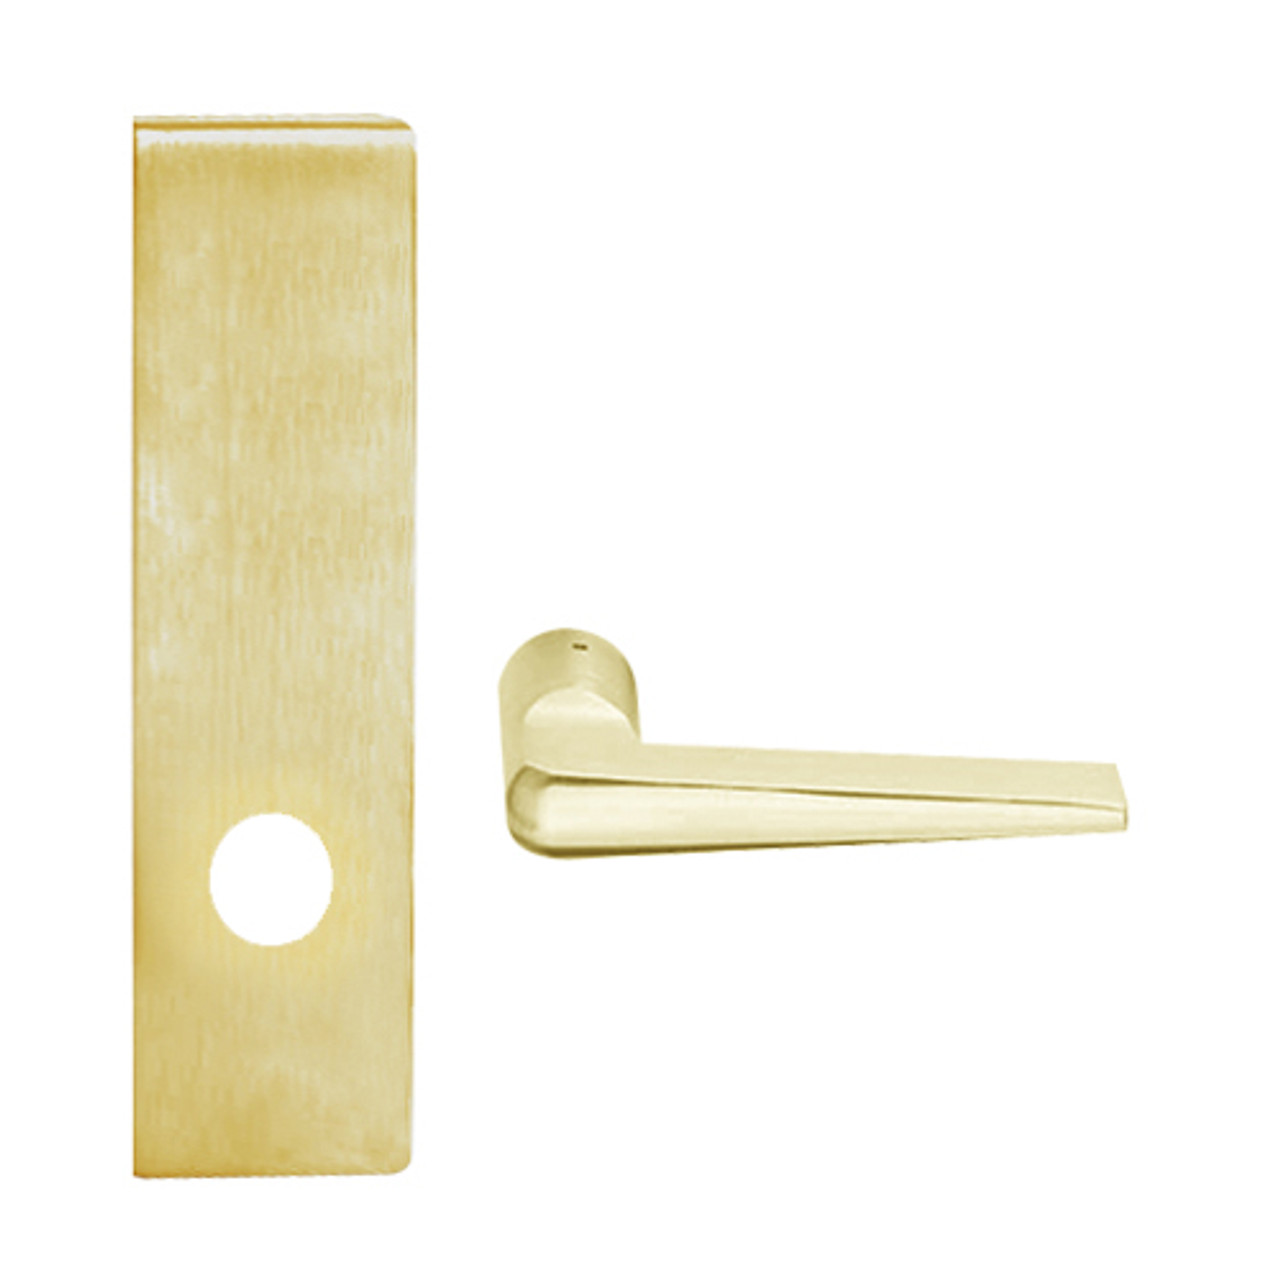 L9010-05N-605 Schlage L Series Passage Latch Commercial Mortise Lock with 05 Cast Lever Design in Bright Brass